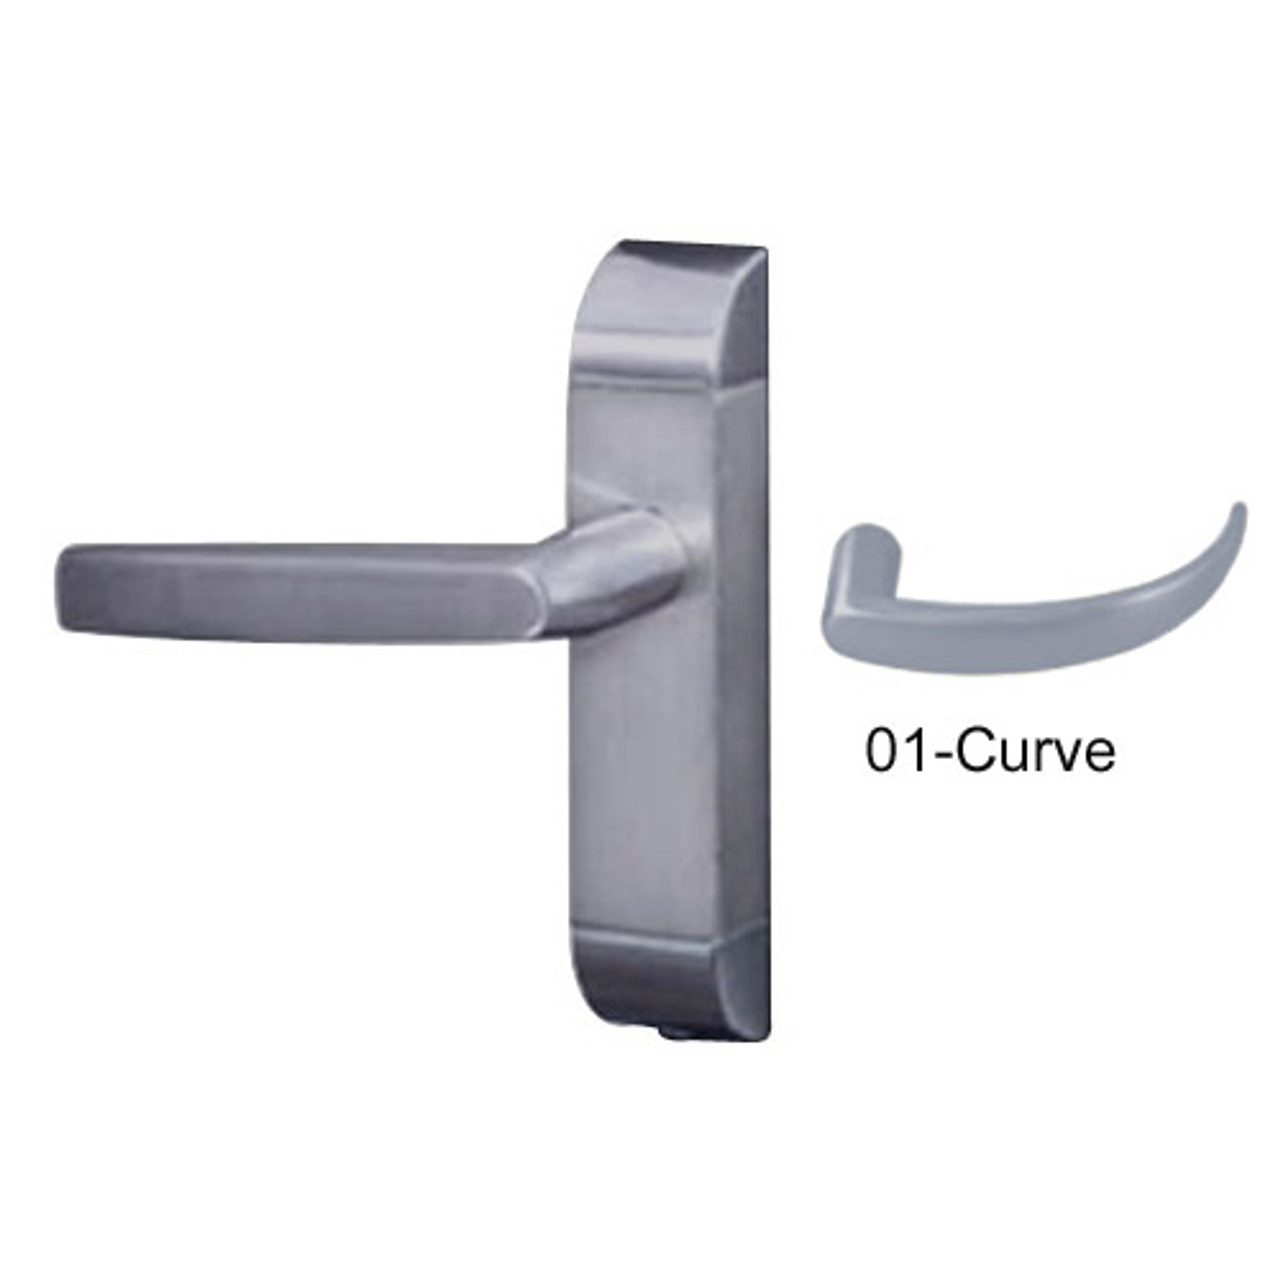 4600-01-612-US32D Adams Rite Heavy Duty Curve Deadlatch Handles in Satin Stainless Finish